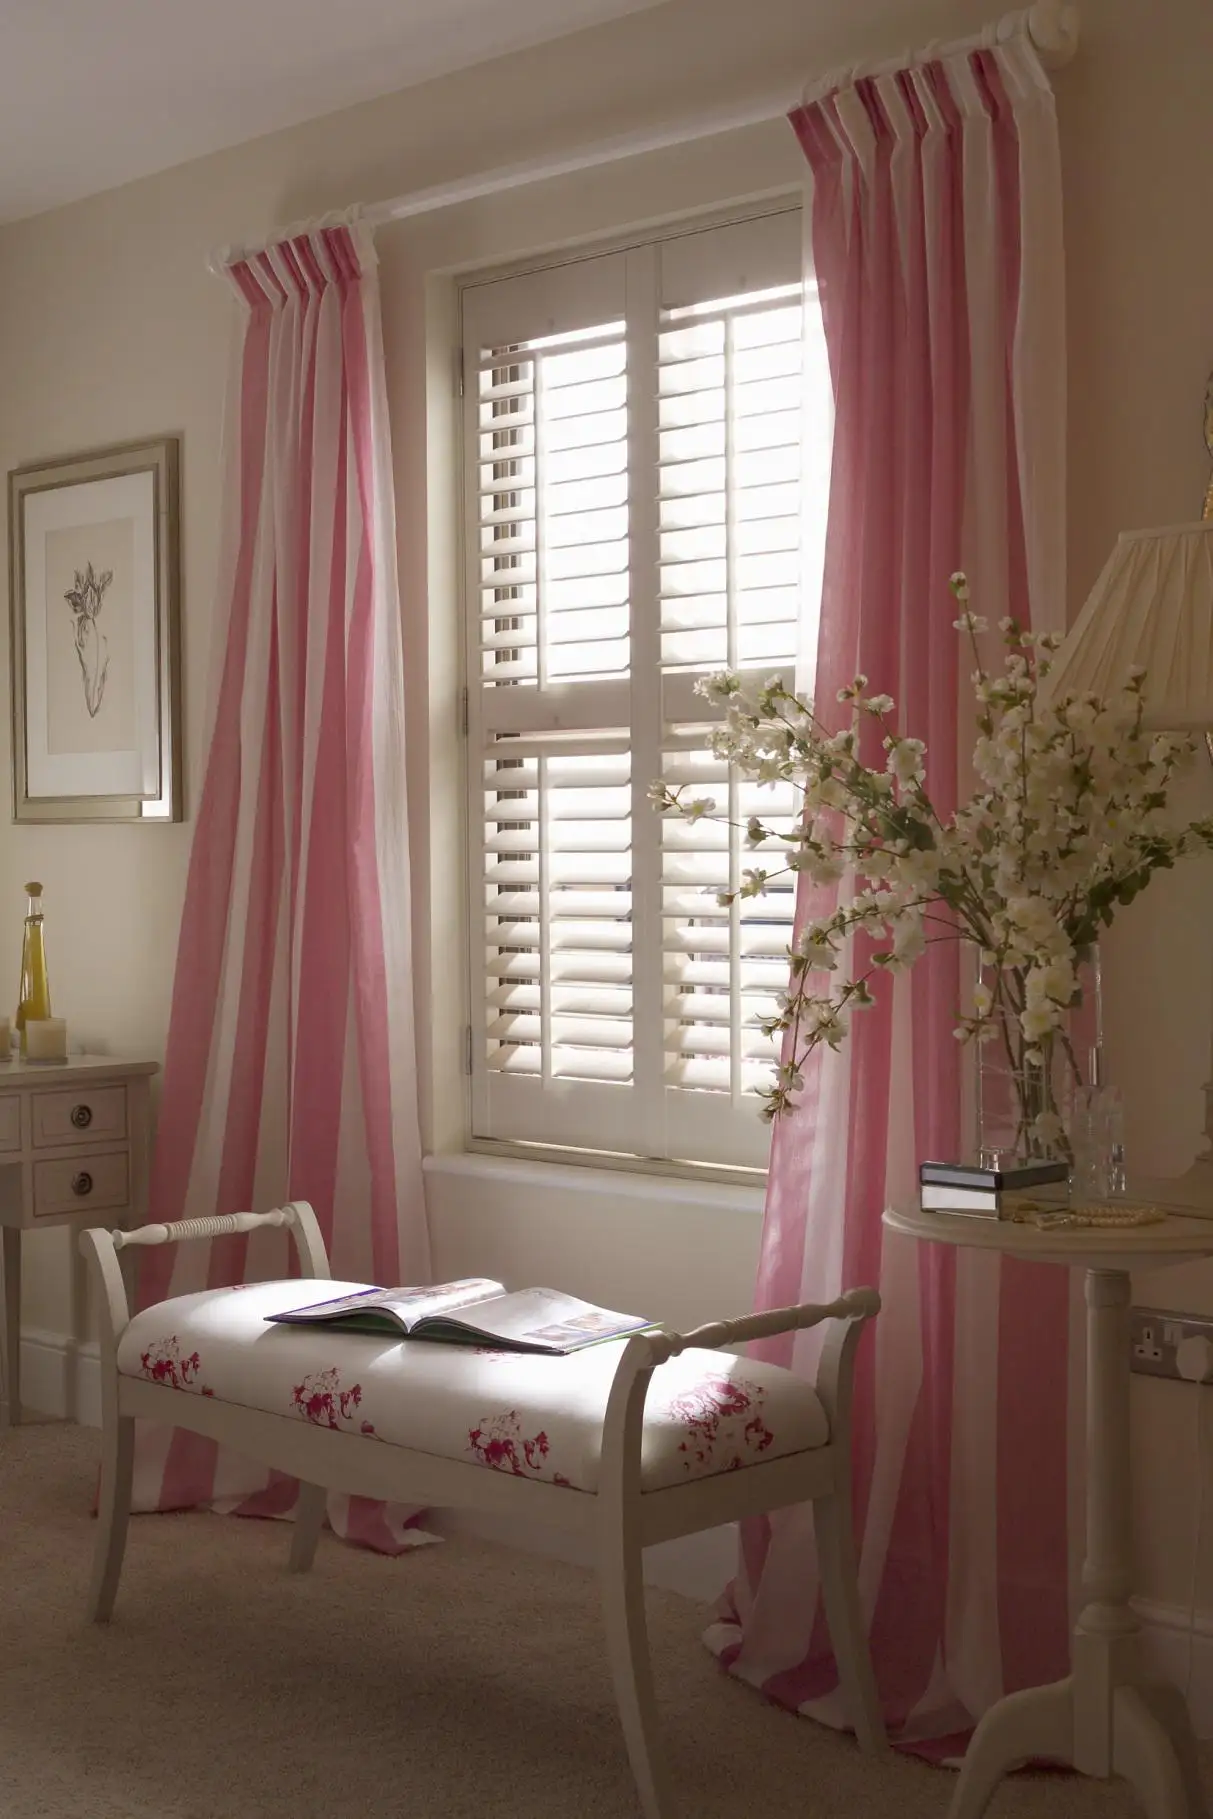 Combining plantation shutters with drapes